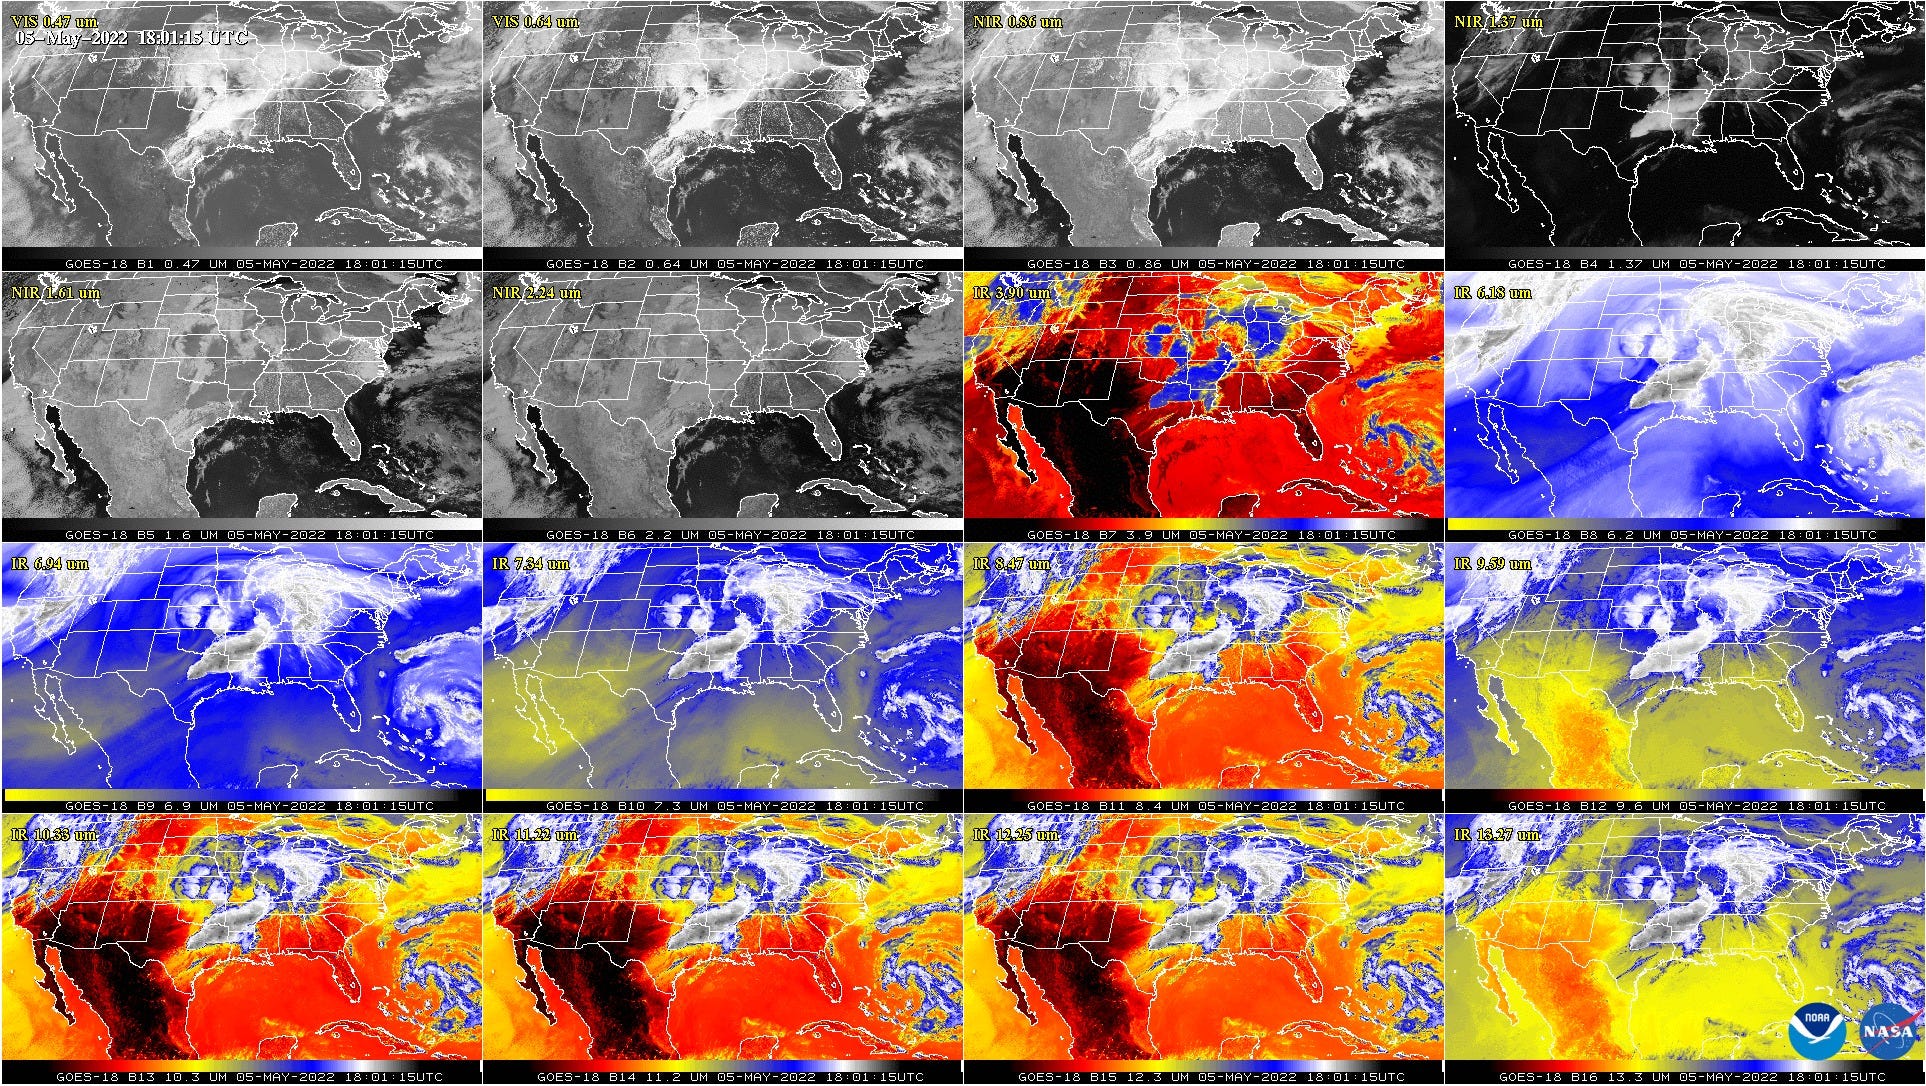 New NOAA Weather Satellite Delivers Its First Stunning Views of Earth